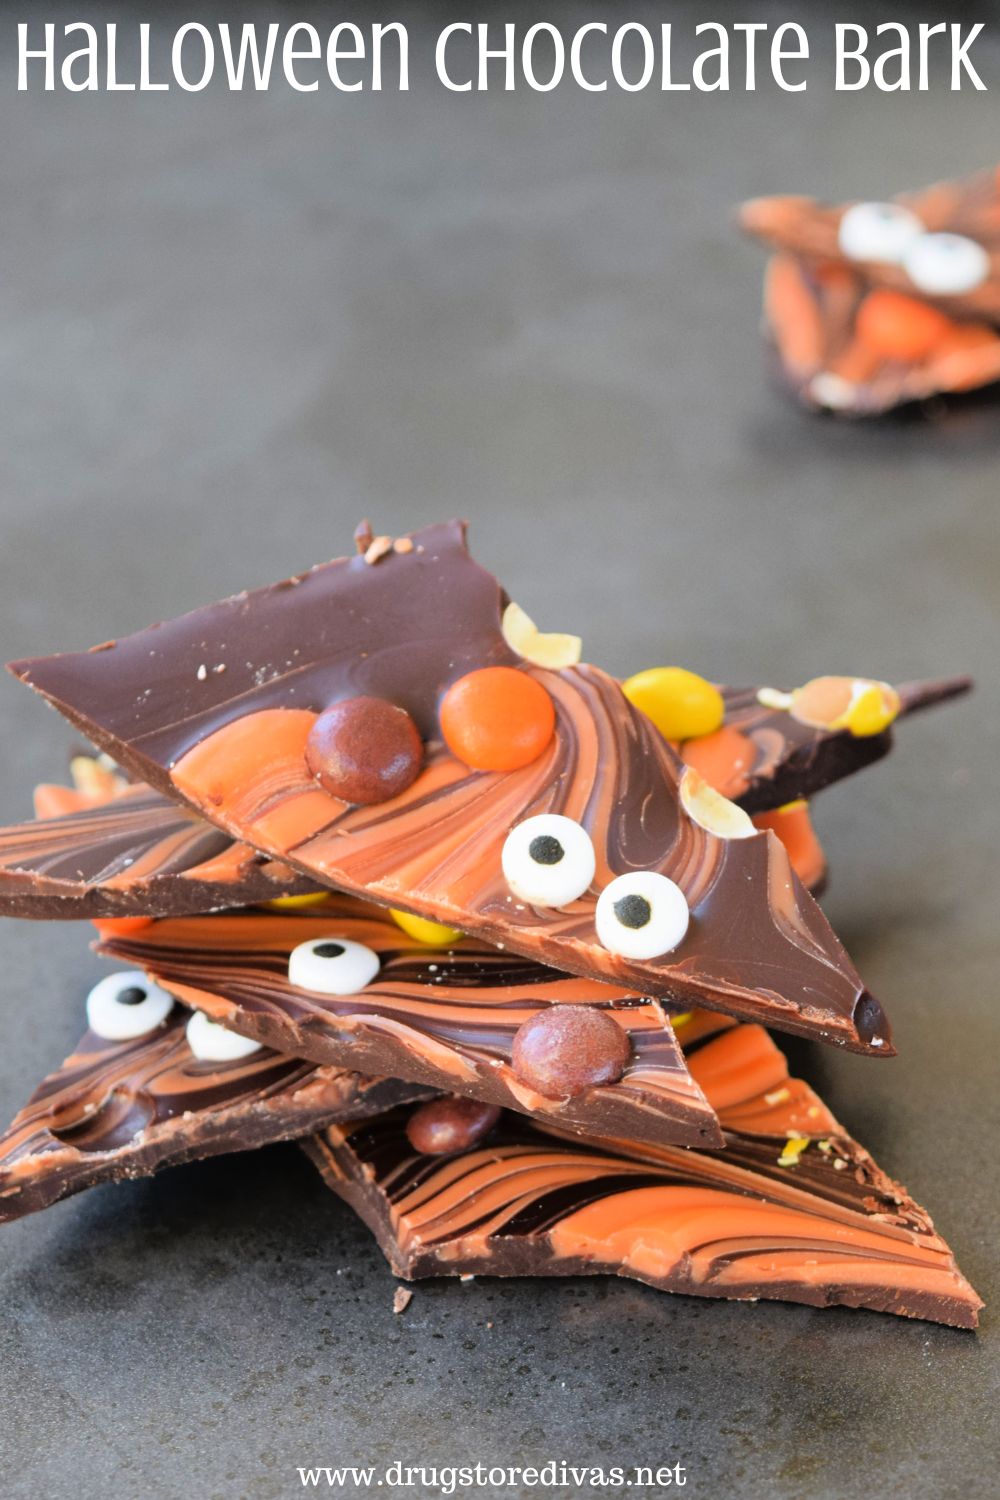 Pieces of brown and orange chocolate bark, with candy eyes and Reese's pieces in it, and the words 